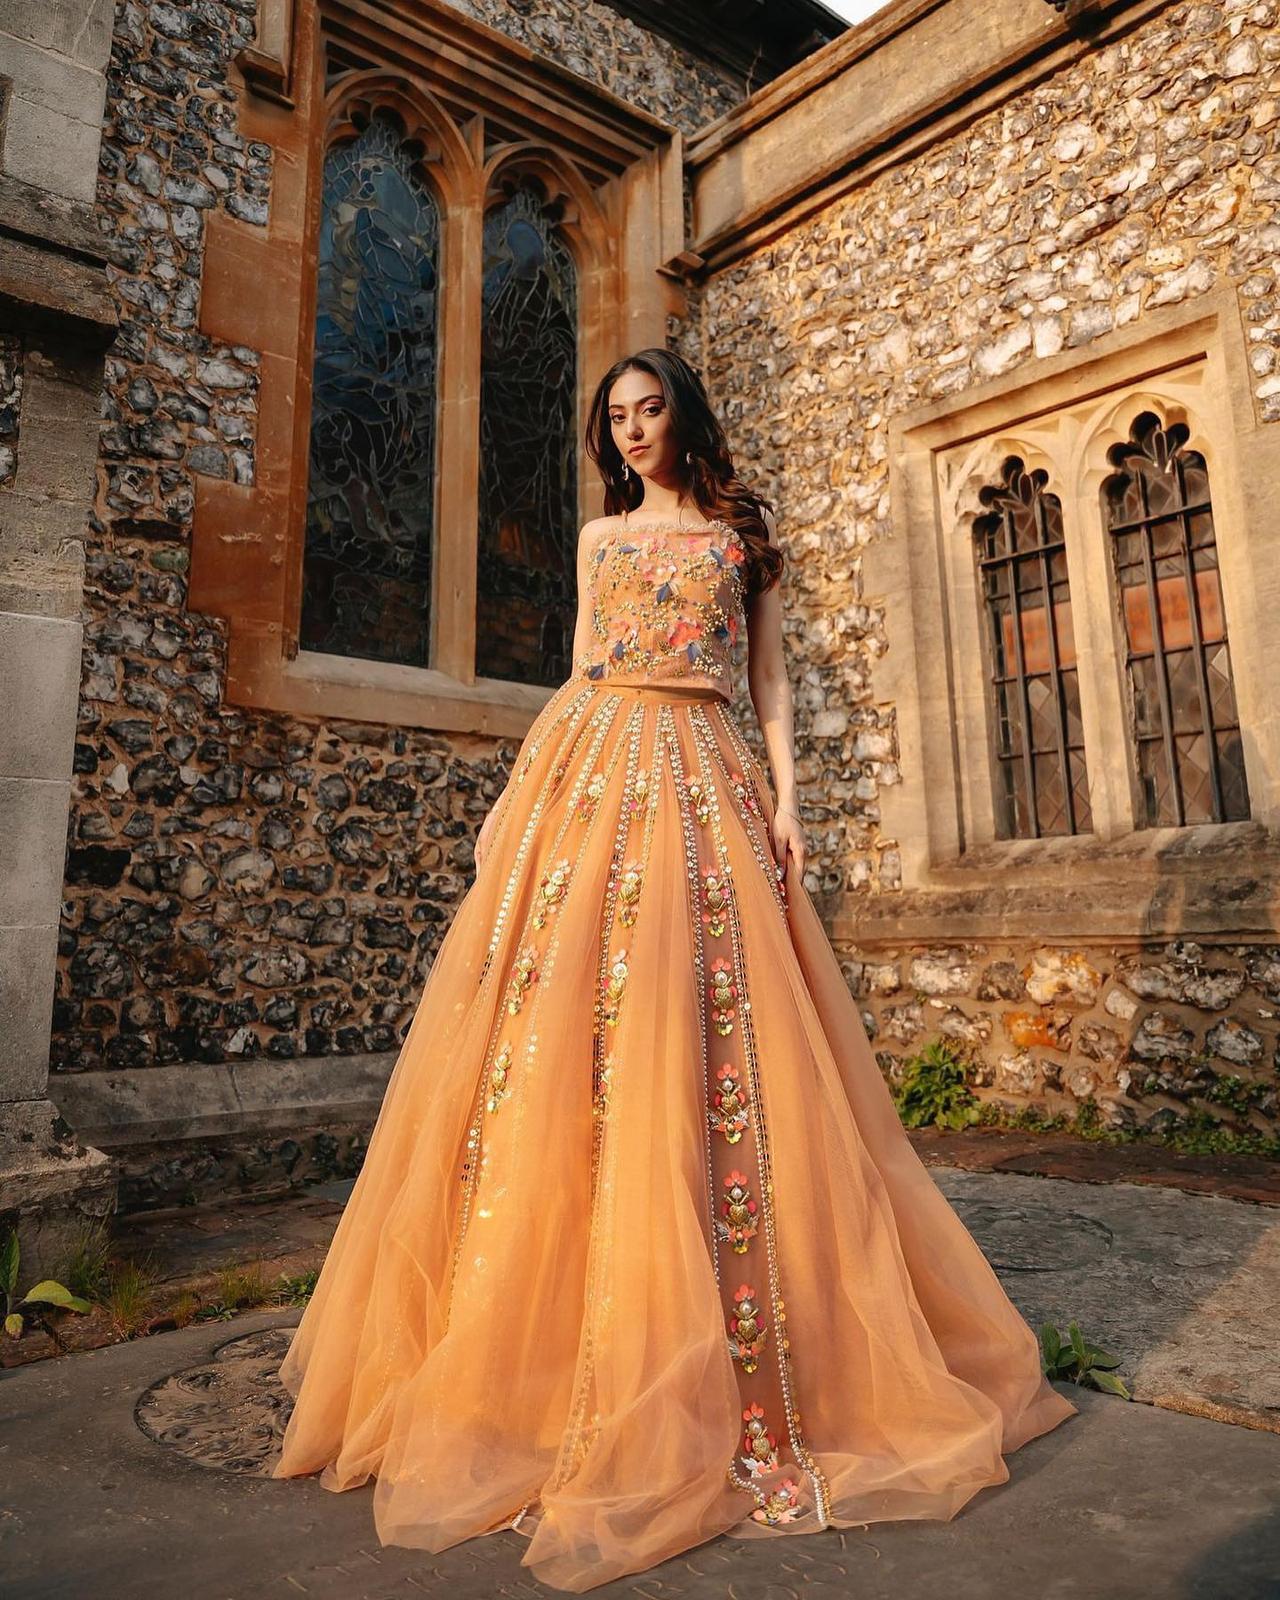 Rohit Bal Velvet Embroidered Corset And Lehenga Set (L, Beige, Wine) in  Surat at best price by Lanchan Designer - Justdial